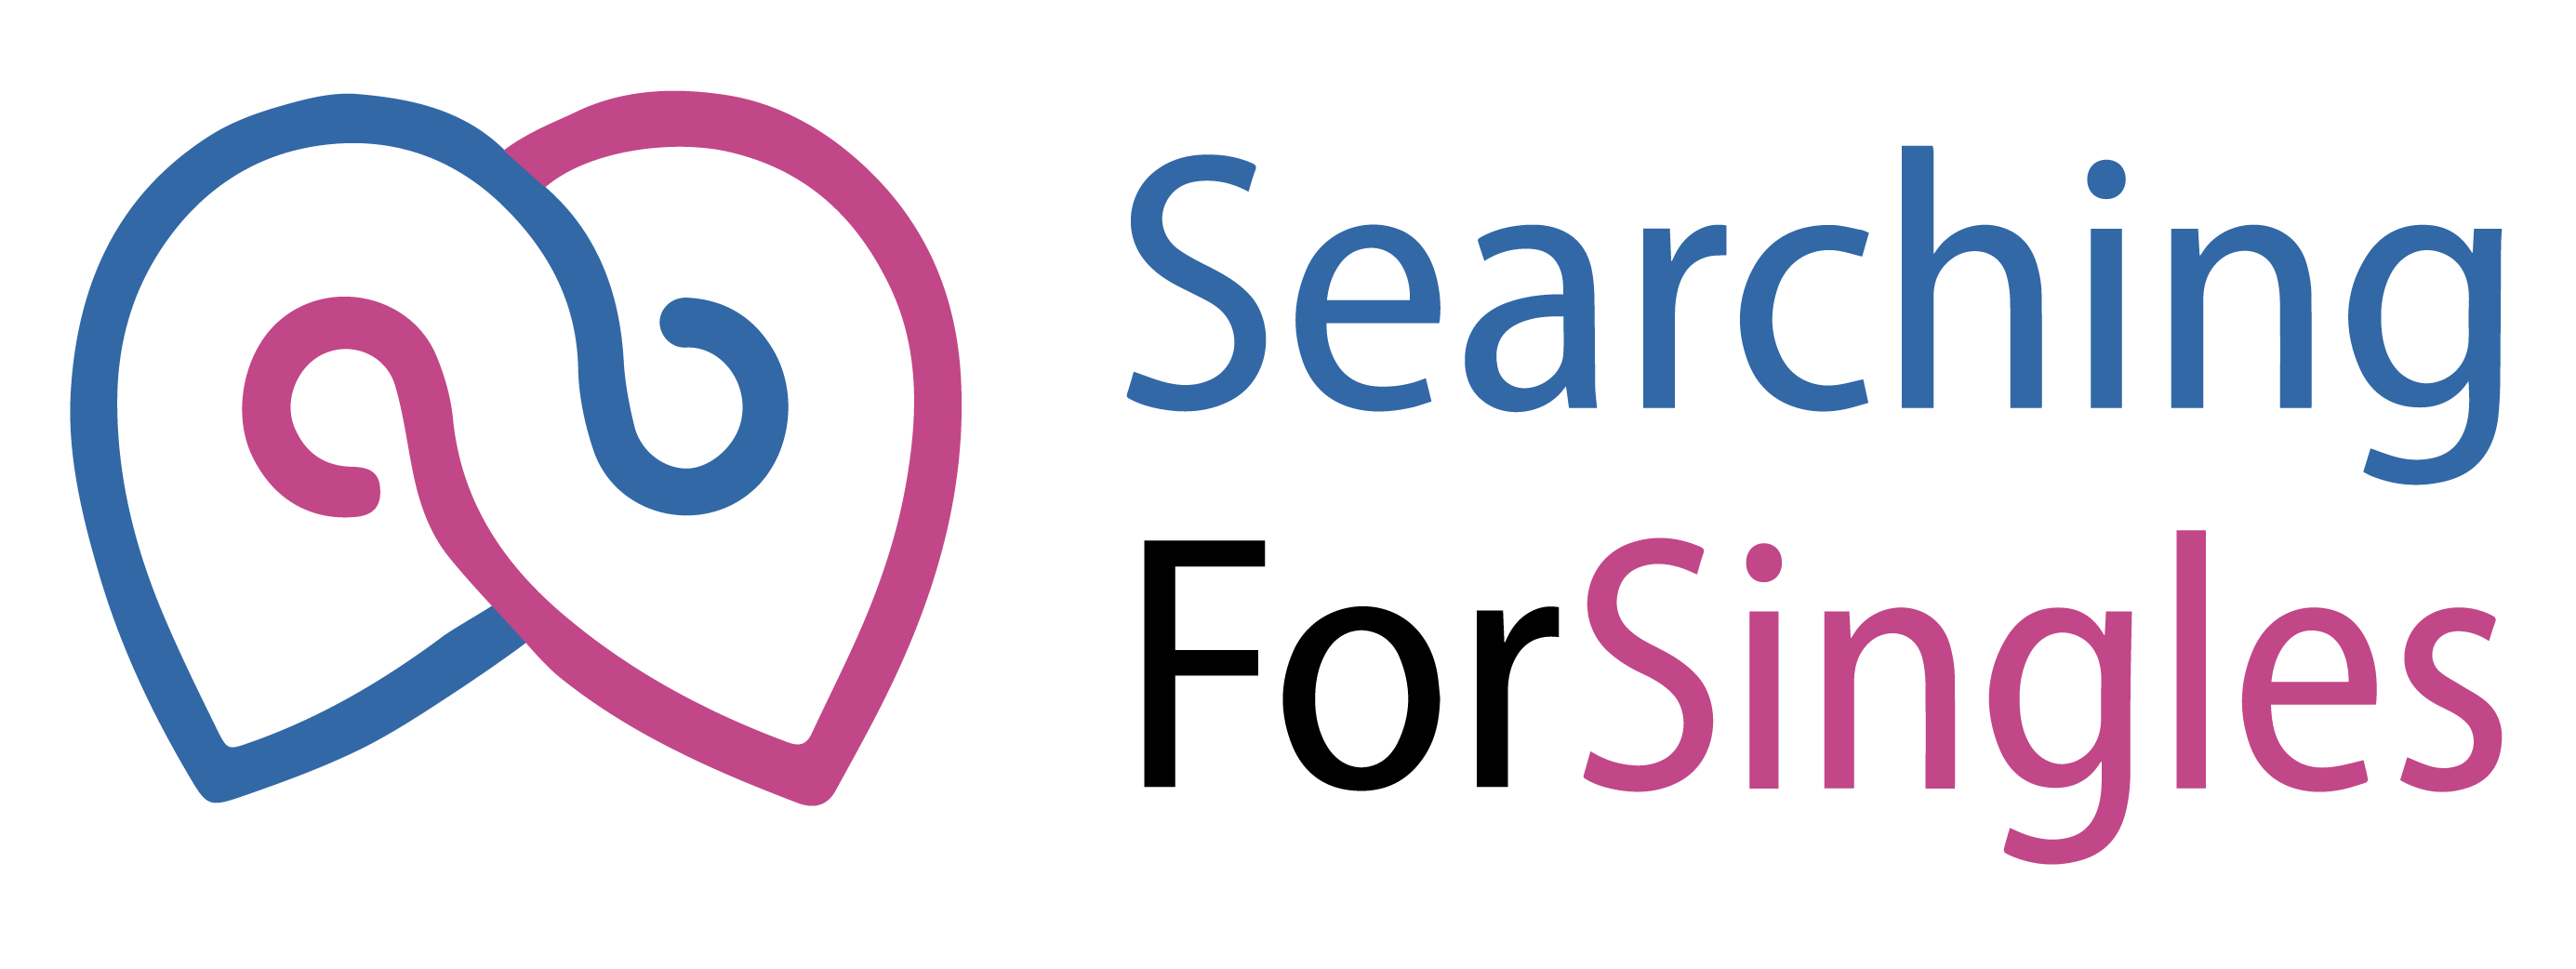 Our Experience with SearchingForSingles Website